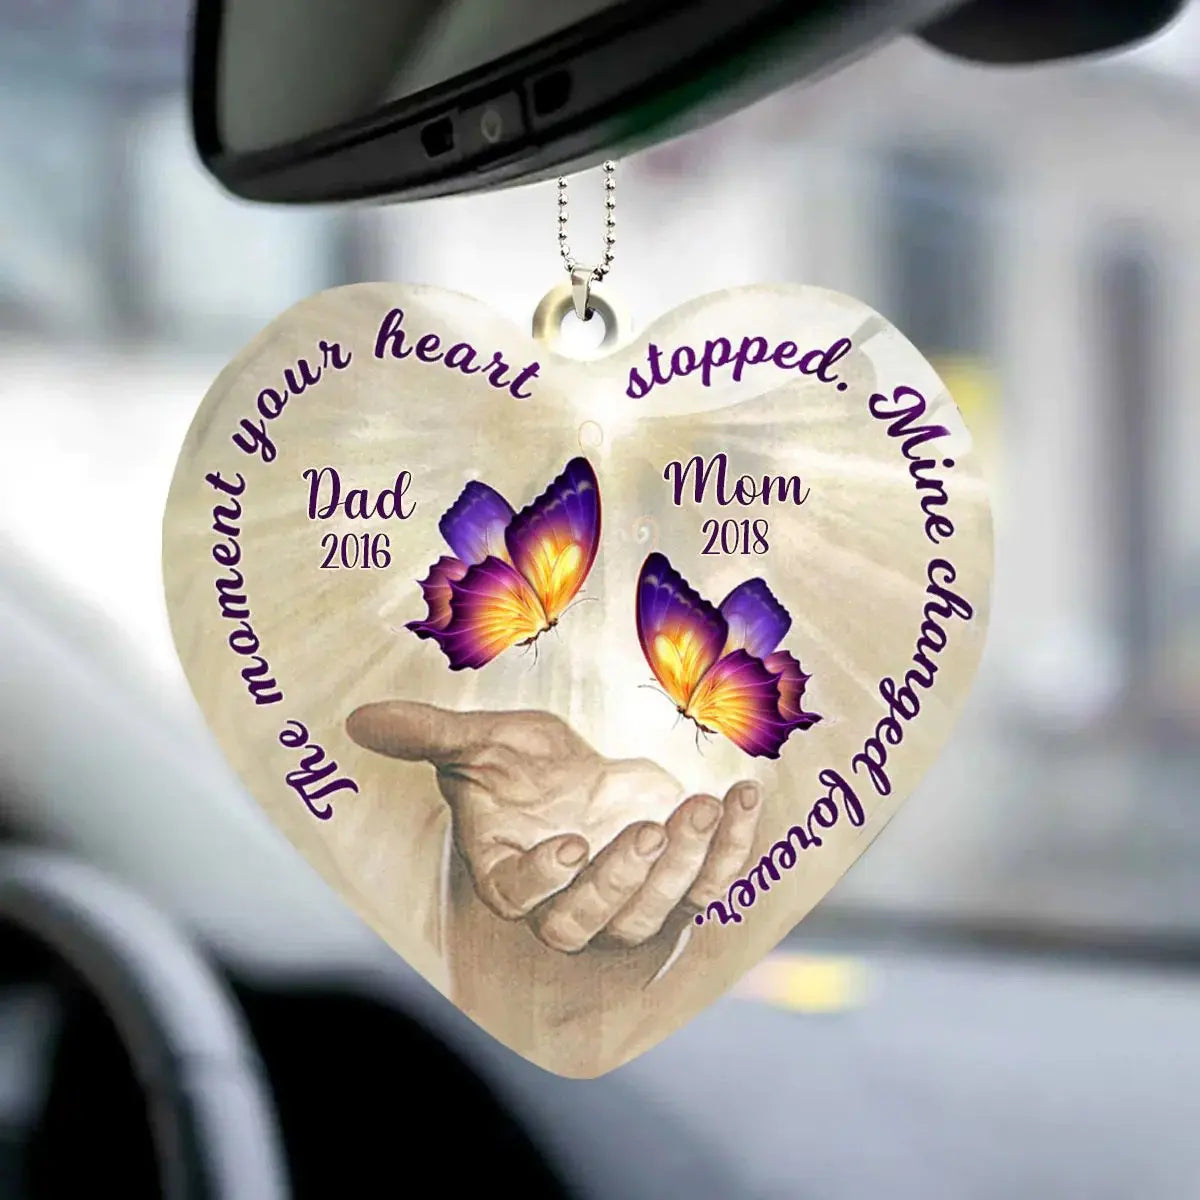 Family - THE MOMENT YOUR HEART STOPPED, MINE CHANGED FOREVER - Personalized Ornament ornament The Next Custom Gift